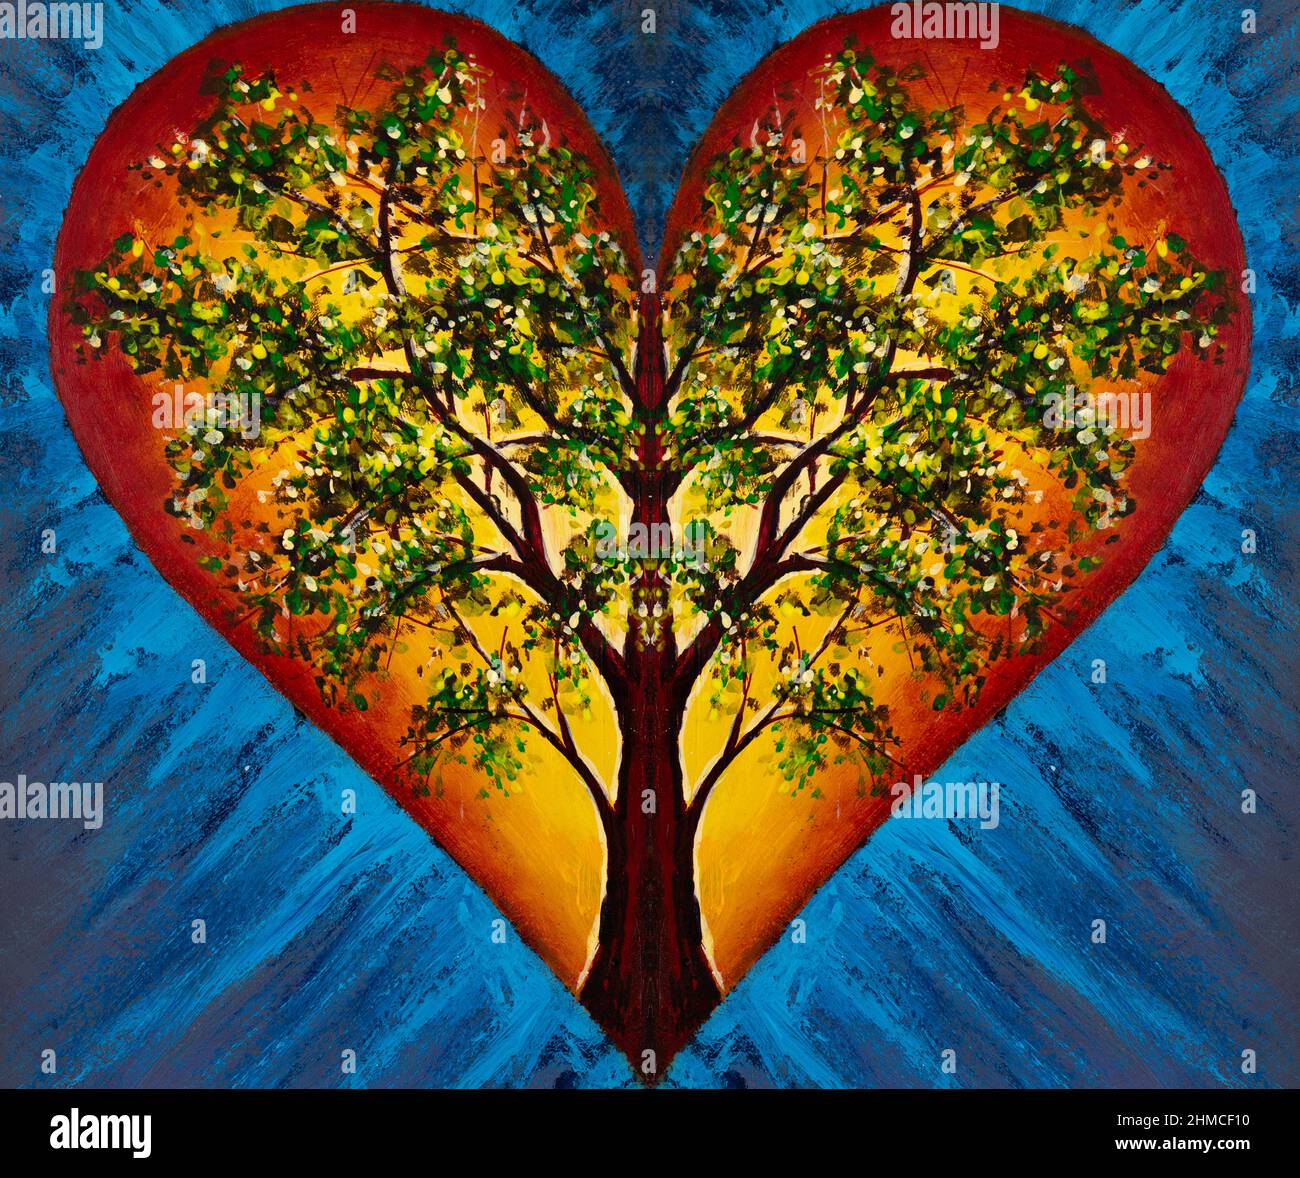 Art painting heart with blossoming tree of life inside on blue background illustration for fairy tales modern artwork Stock Photo